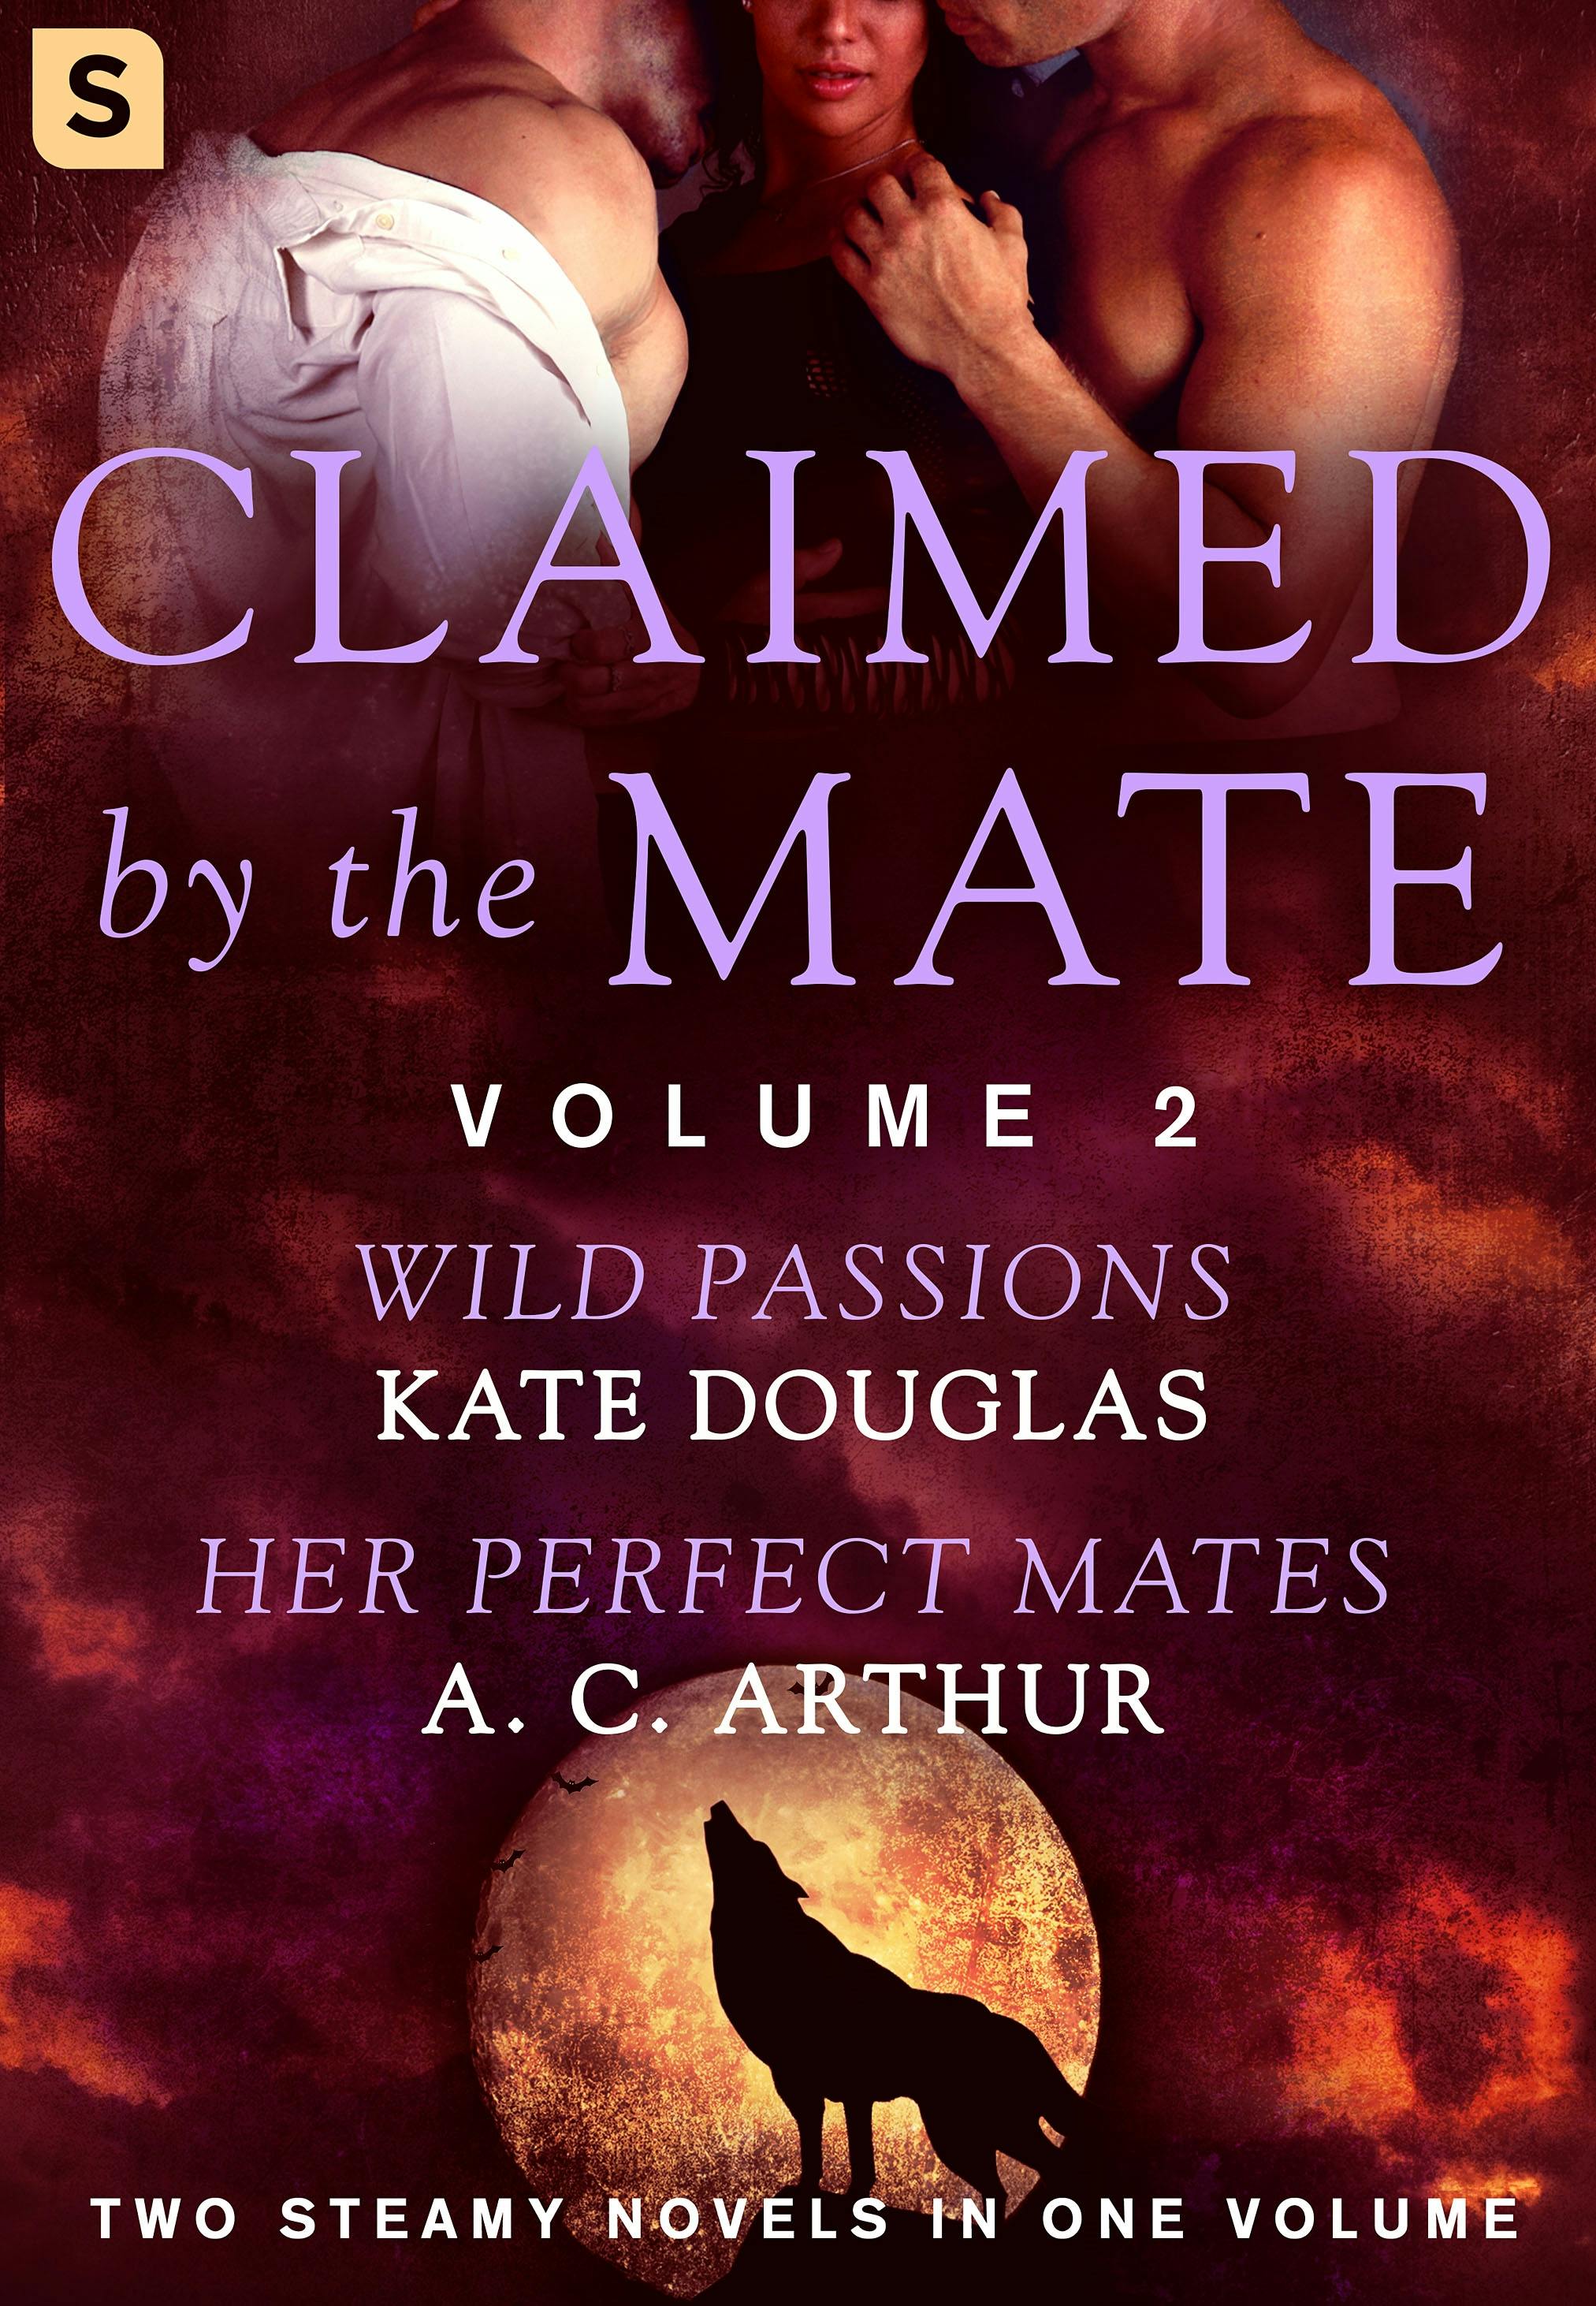 Image of Claimed by the Mate, Vol. 2